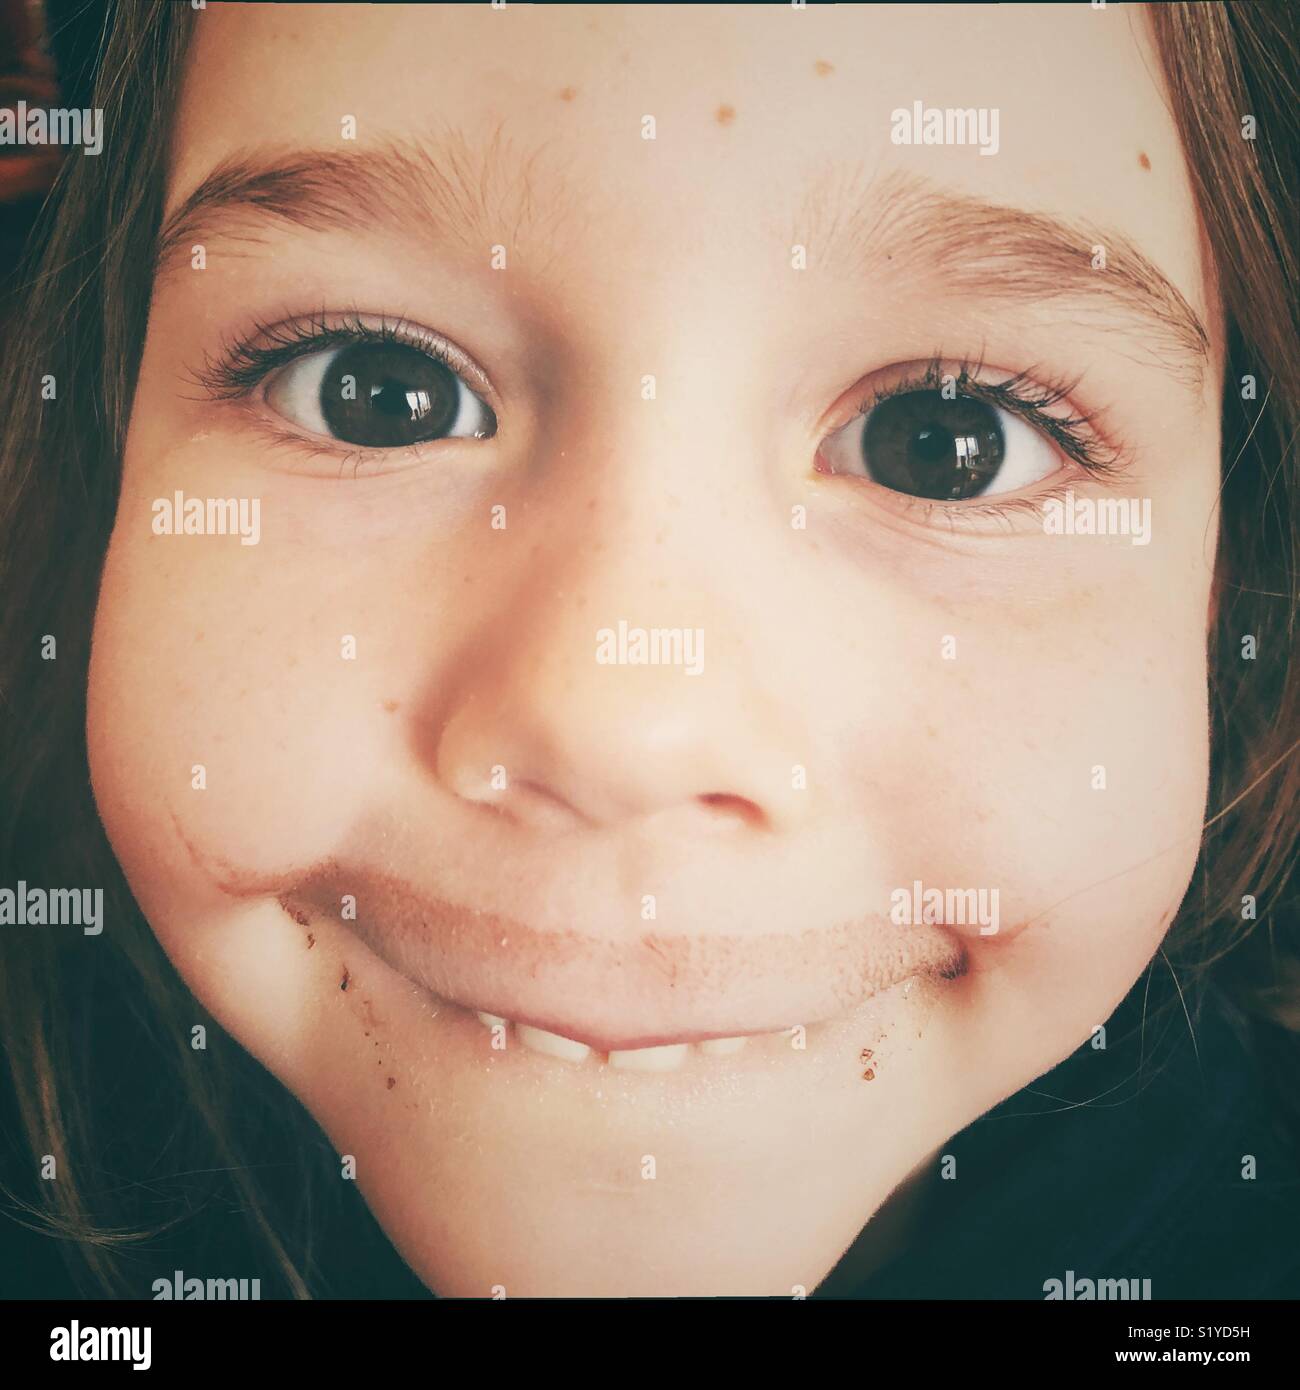 Closeup portrait of young brown eyed girl looking at camera with chocolate milk moustache and silly smile Stock Photo